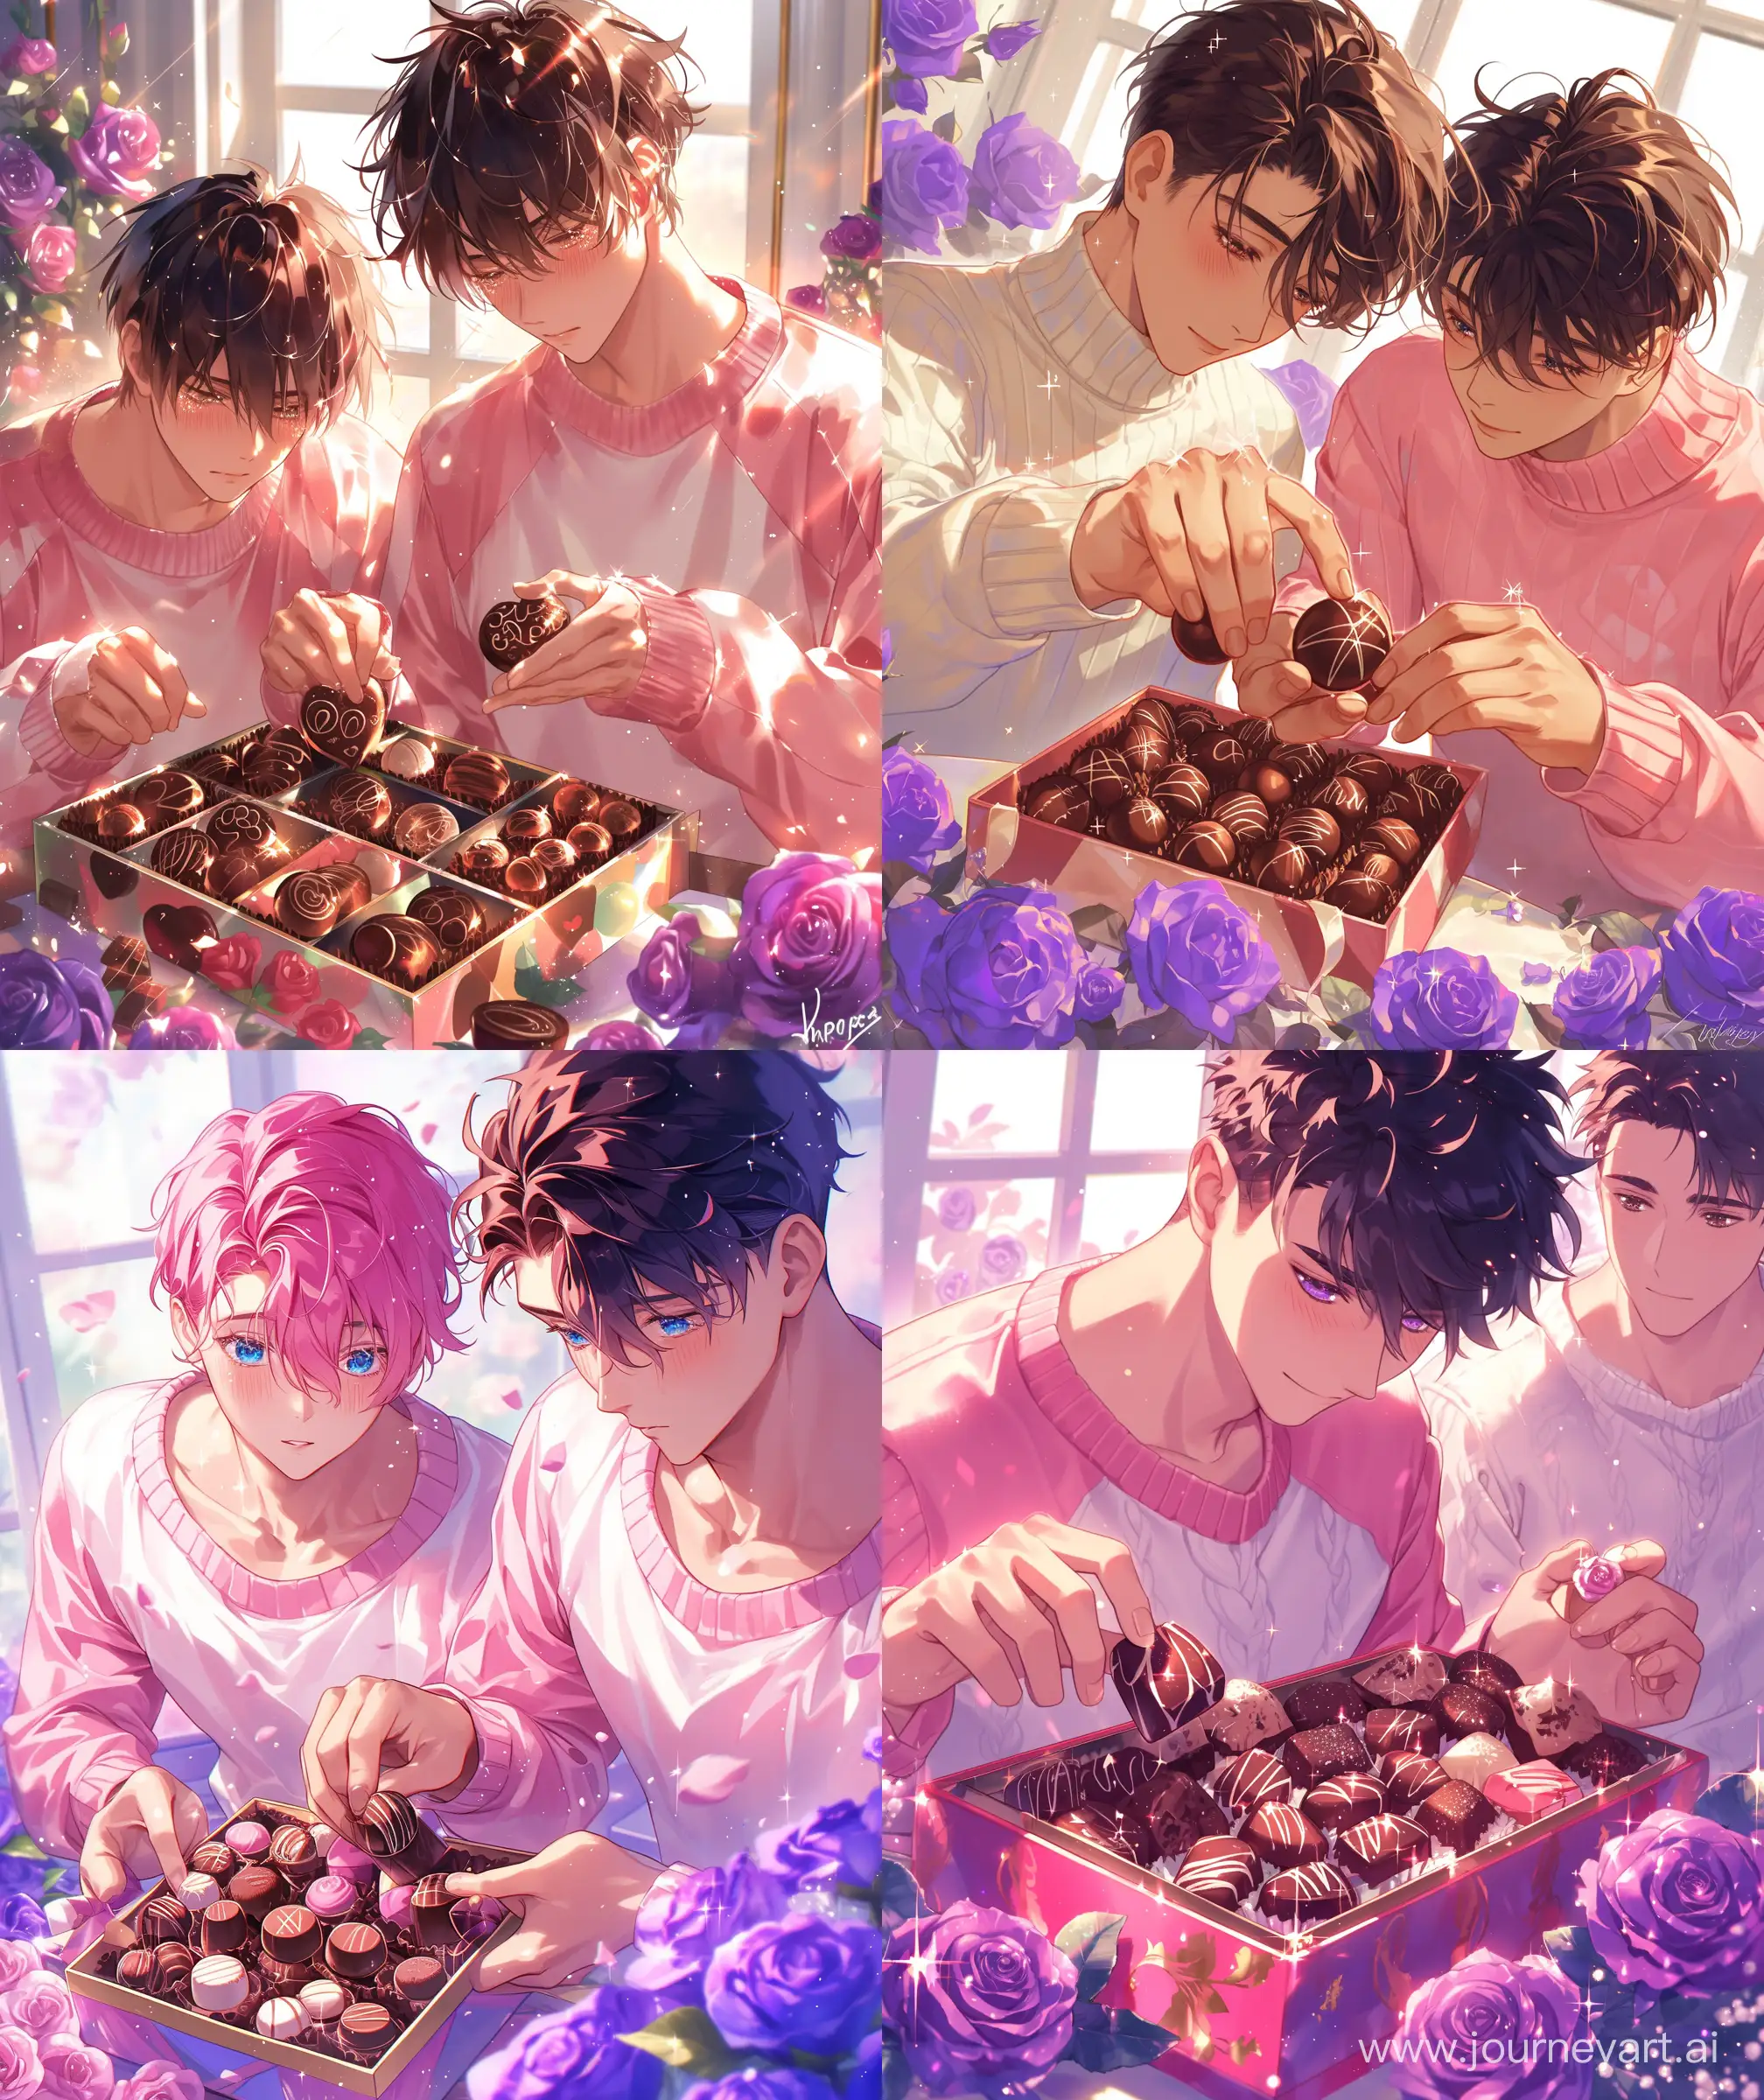 Romantic-Anime-Men-Decorating-Chocolates-with-Purple-Roses-in-High-Quality